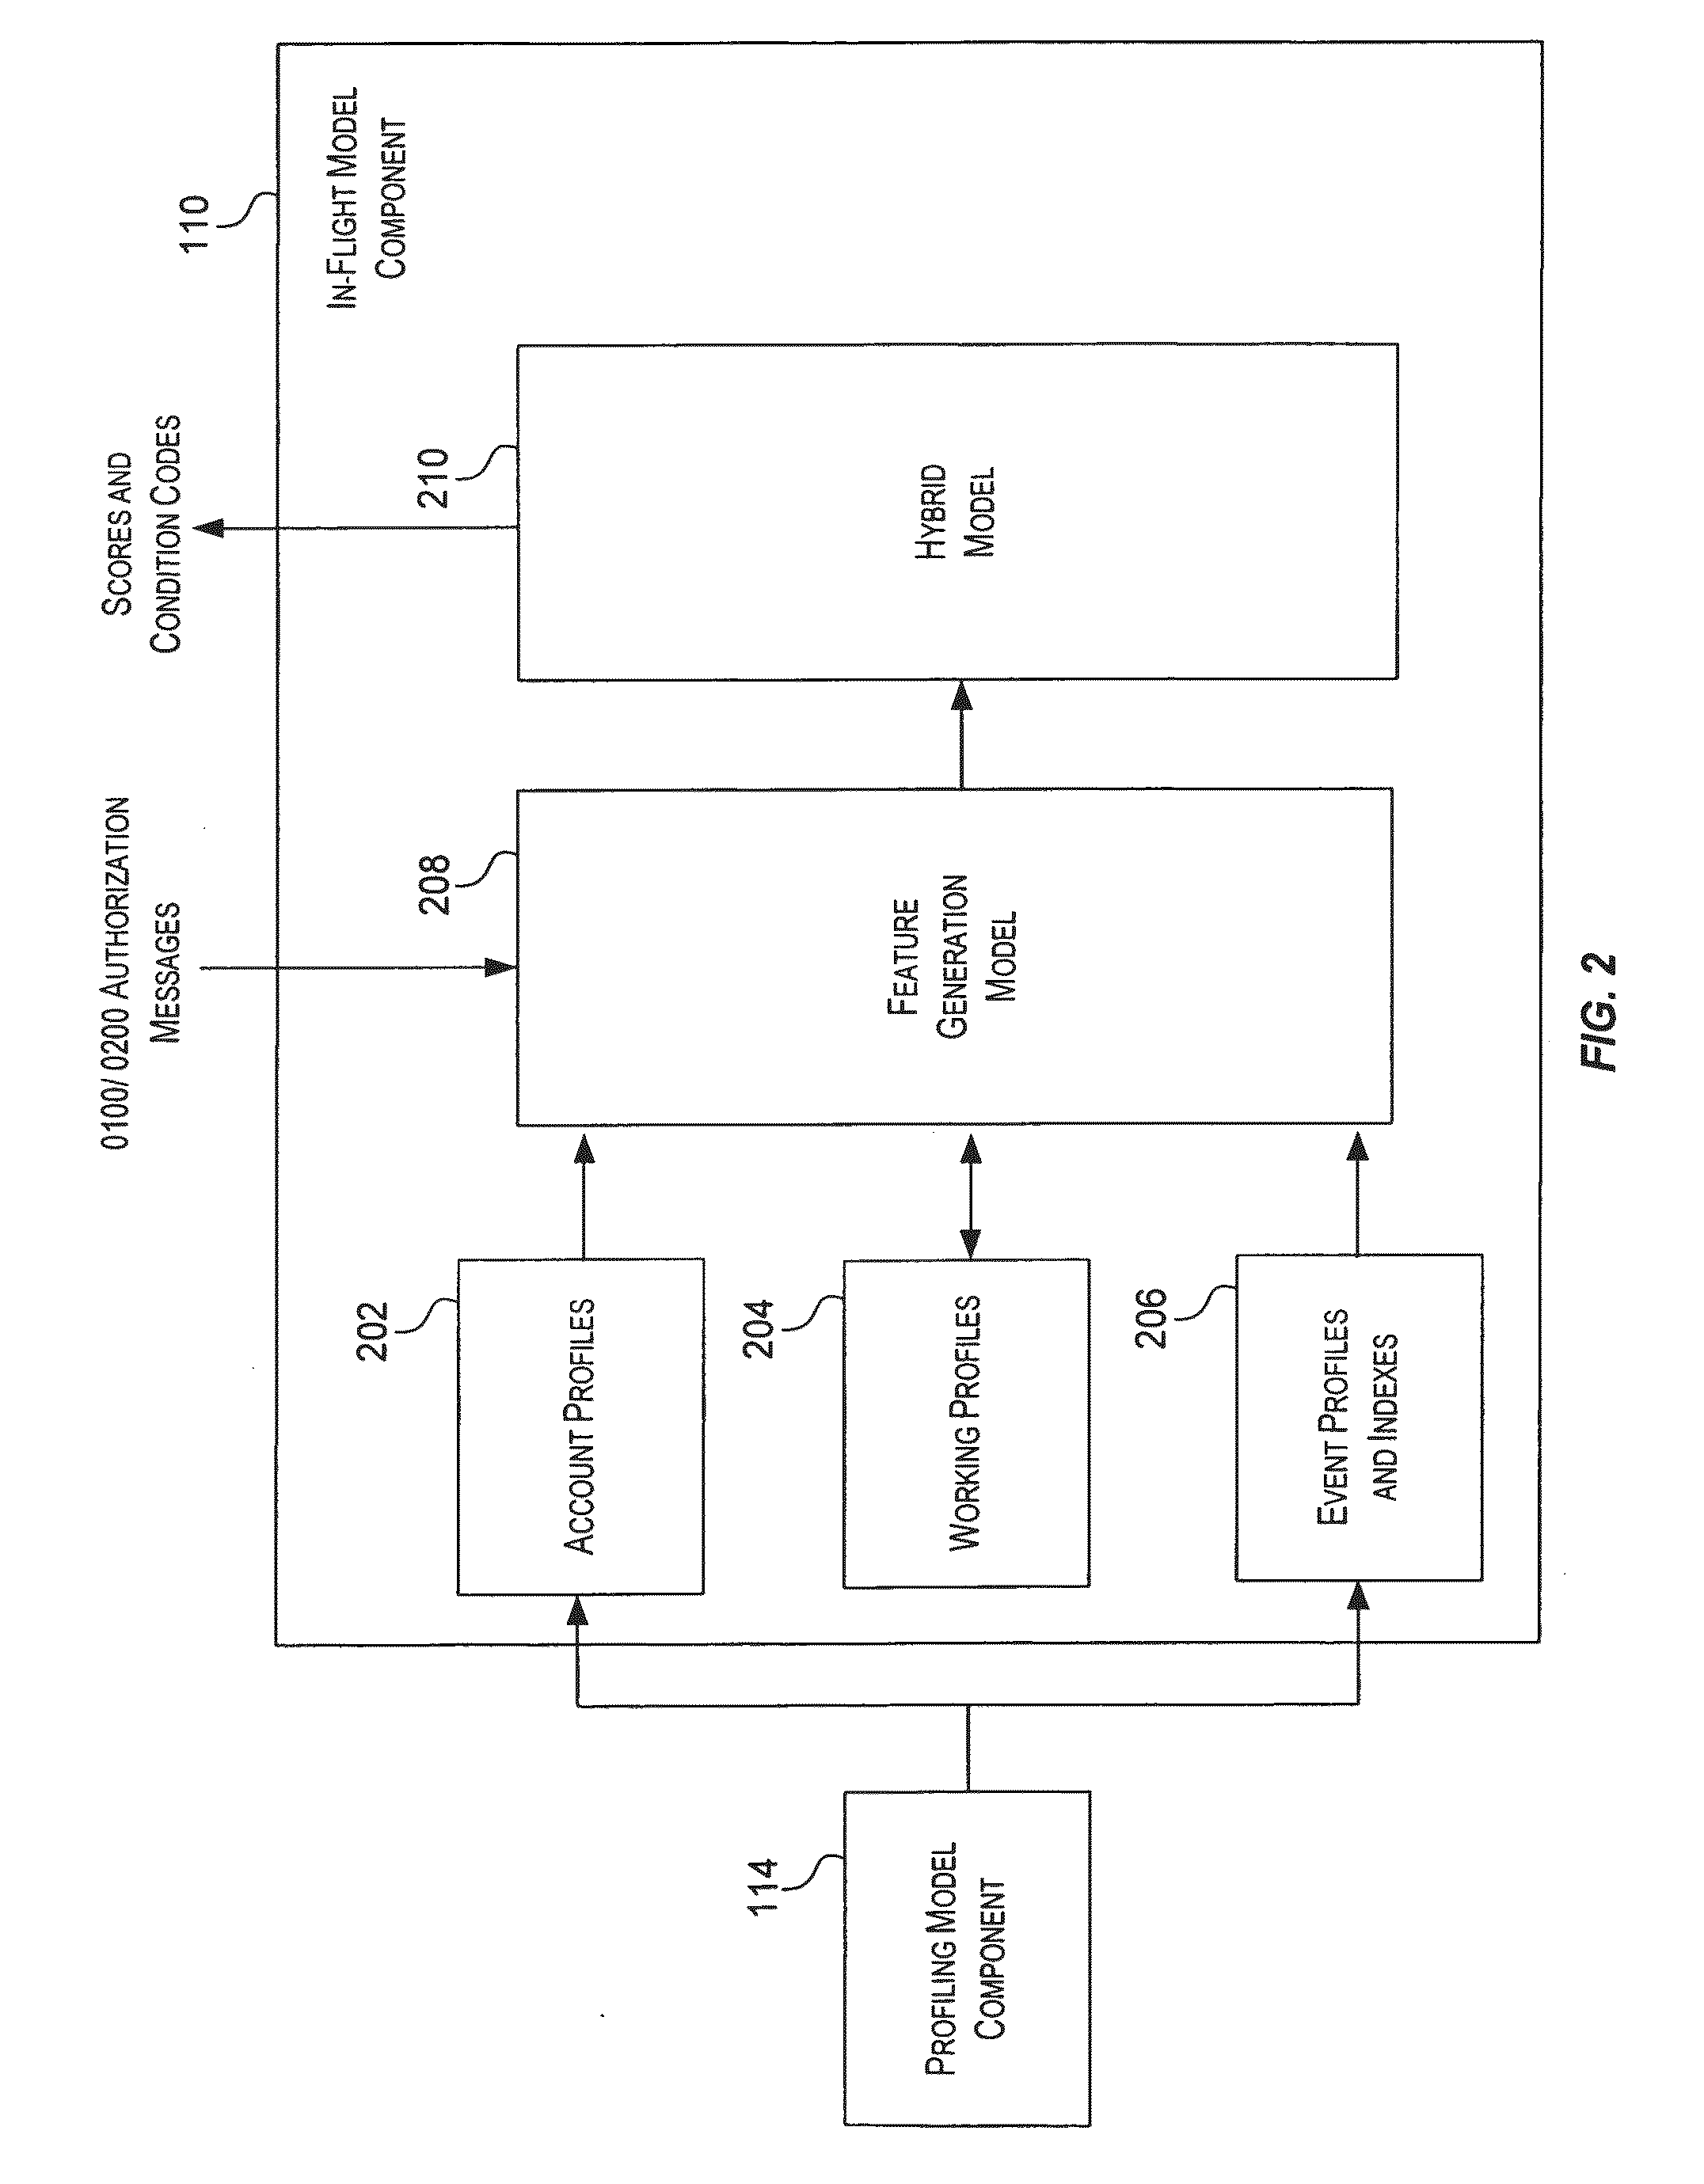 Method and System for Providing Risk Information in Connection with Transaction Processing